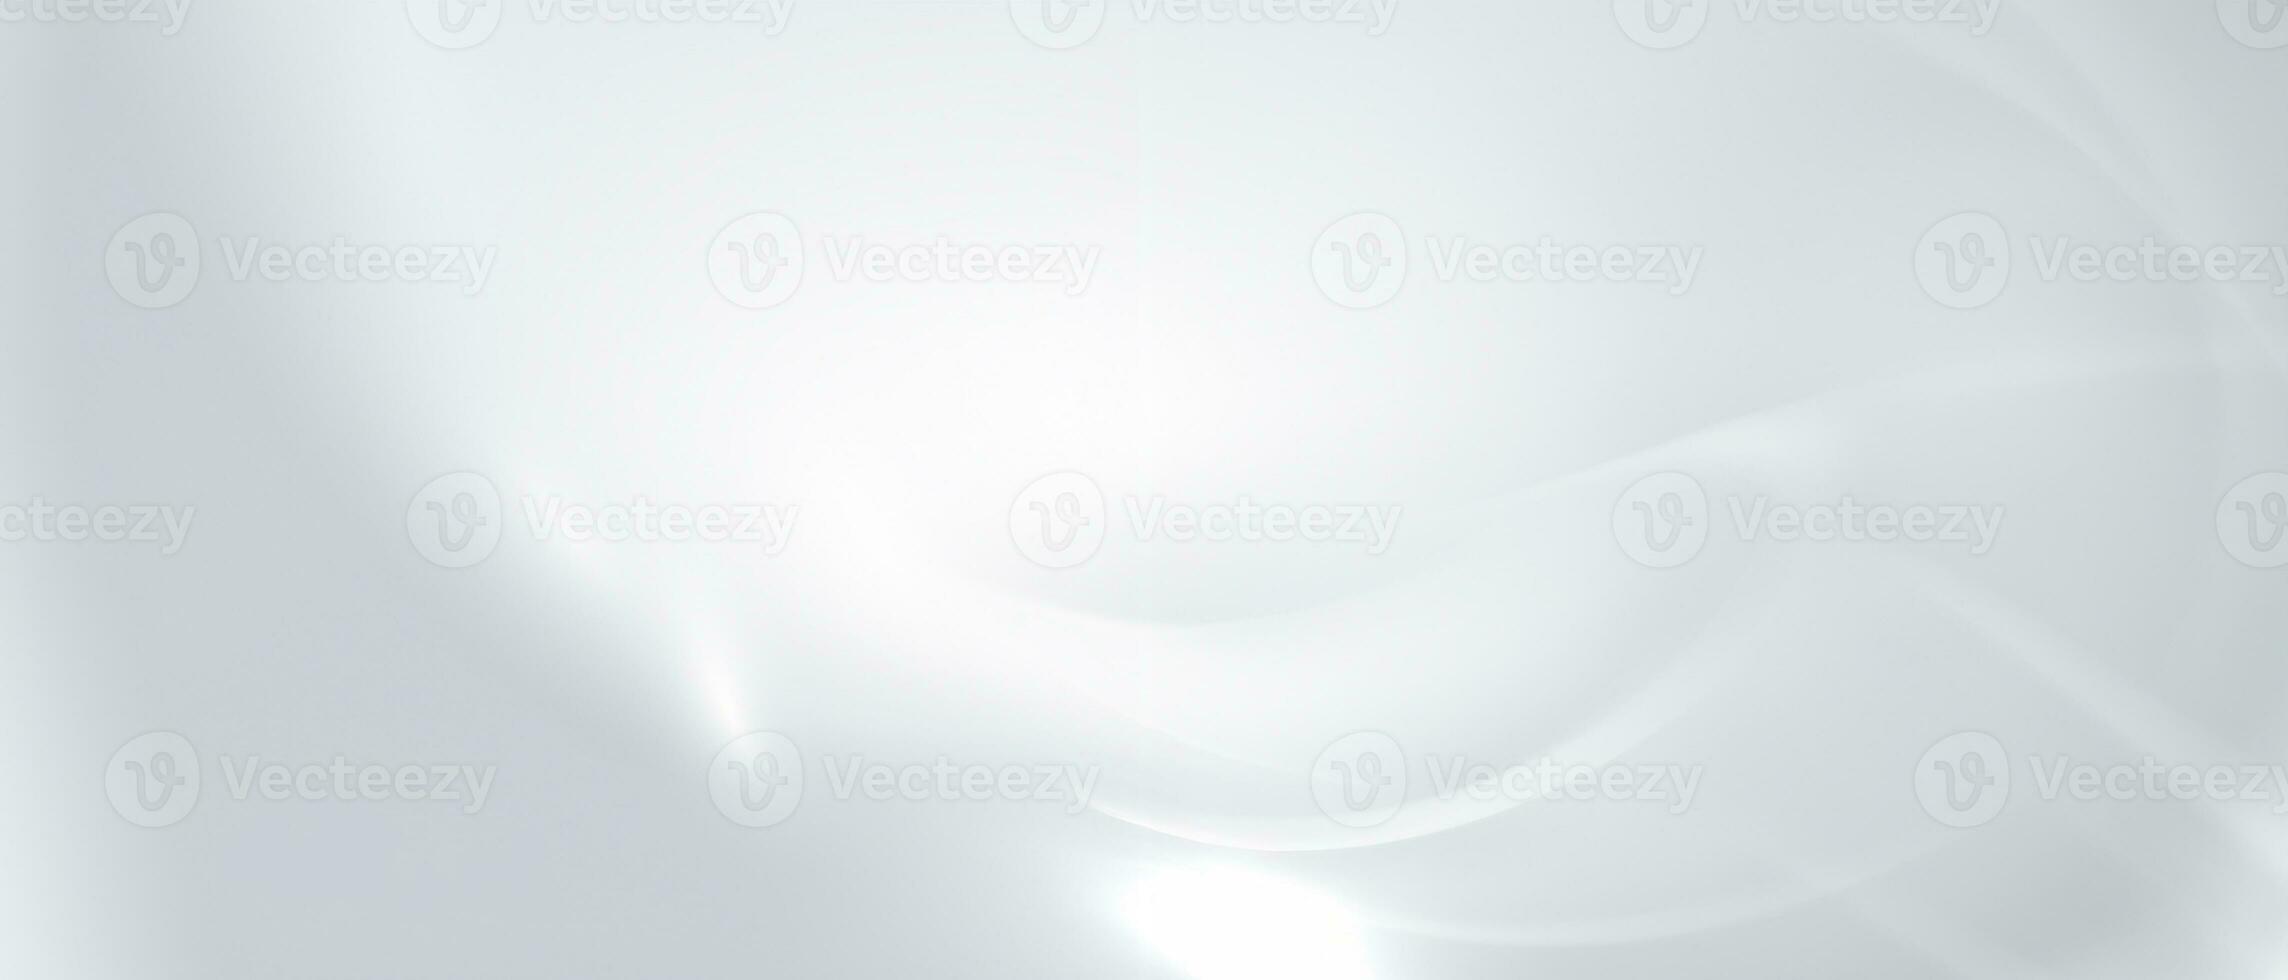 Abstract Modern Design Illustration On White And Gray Background photo